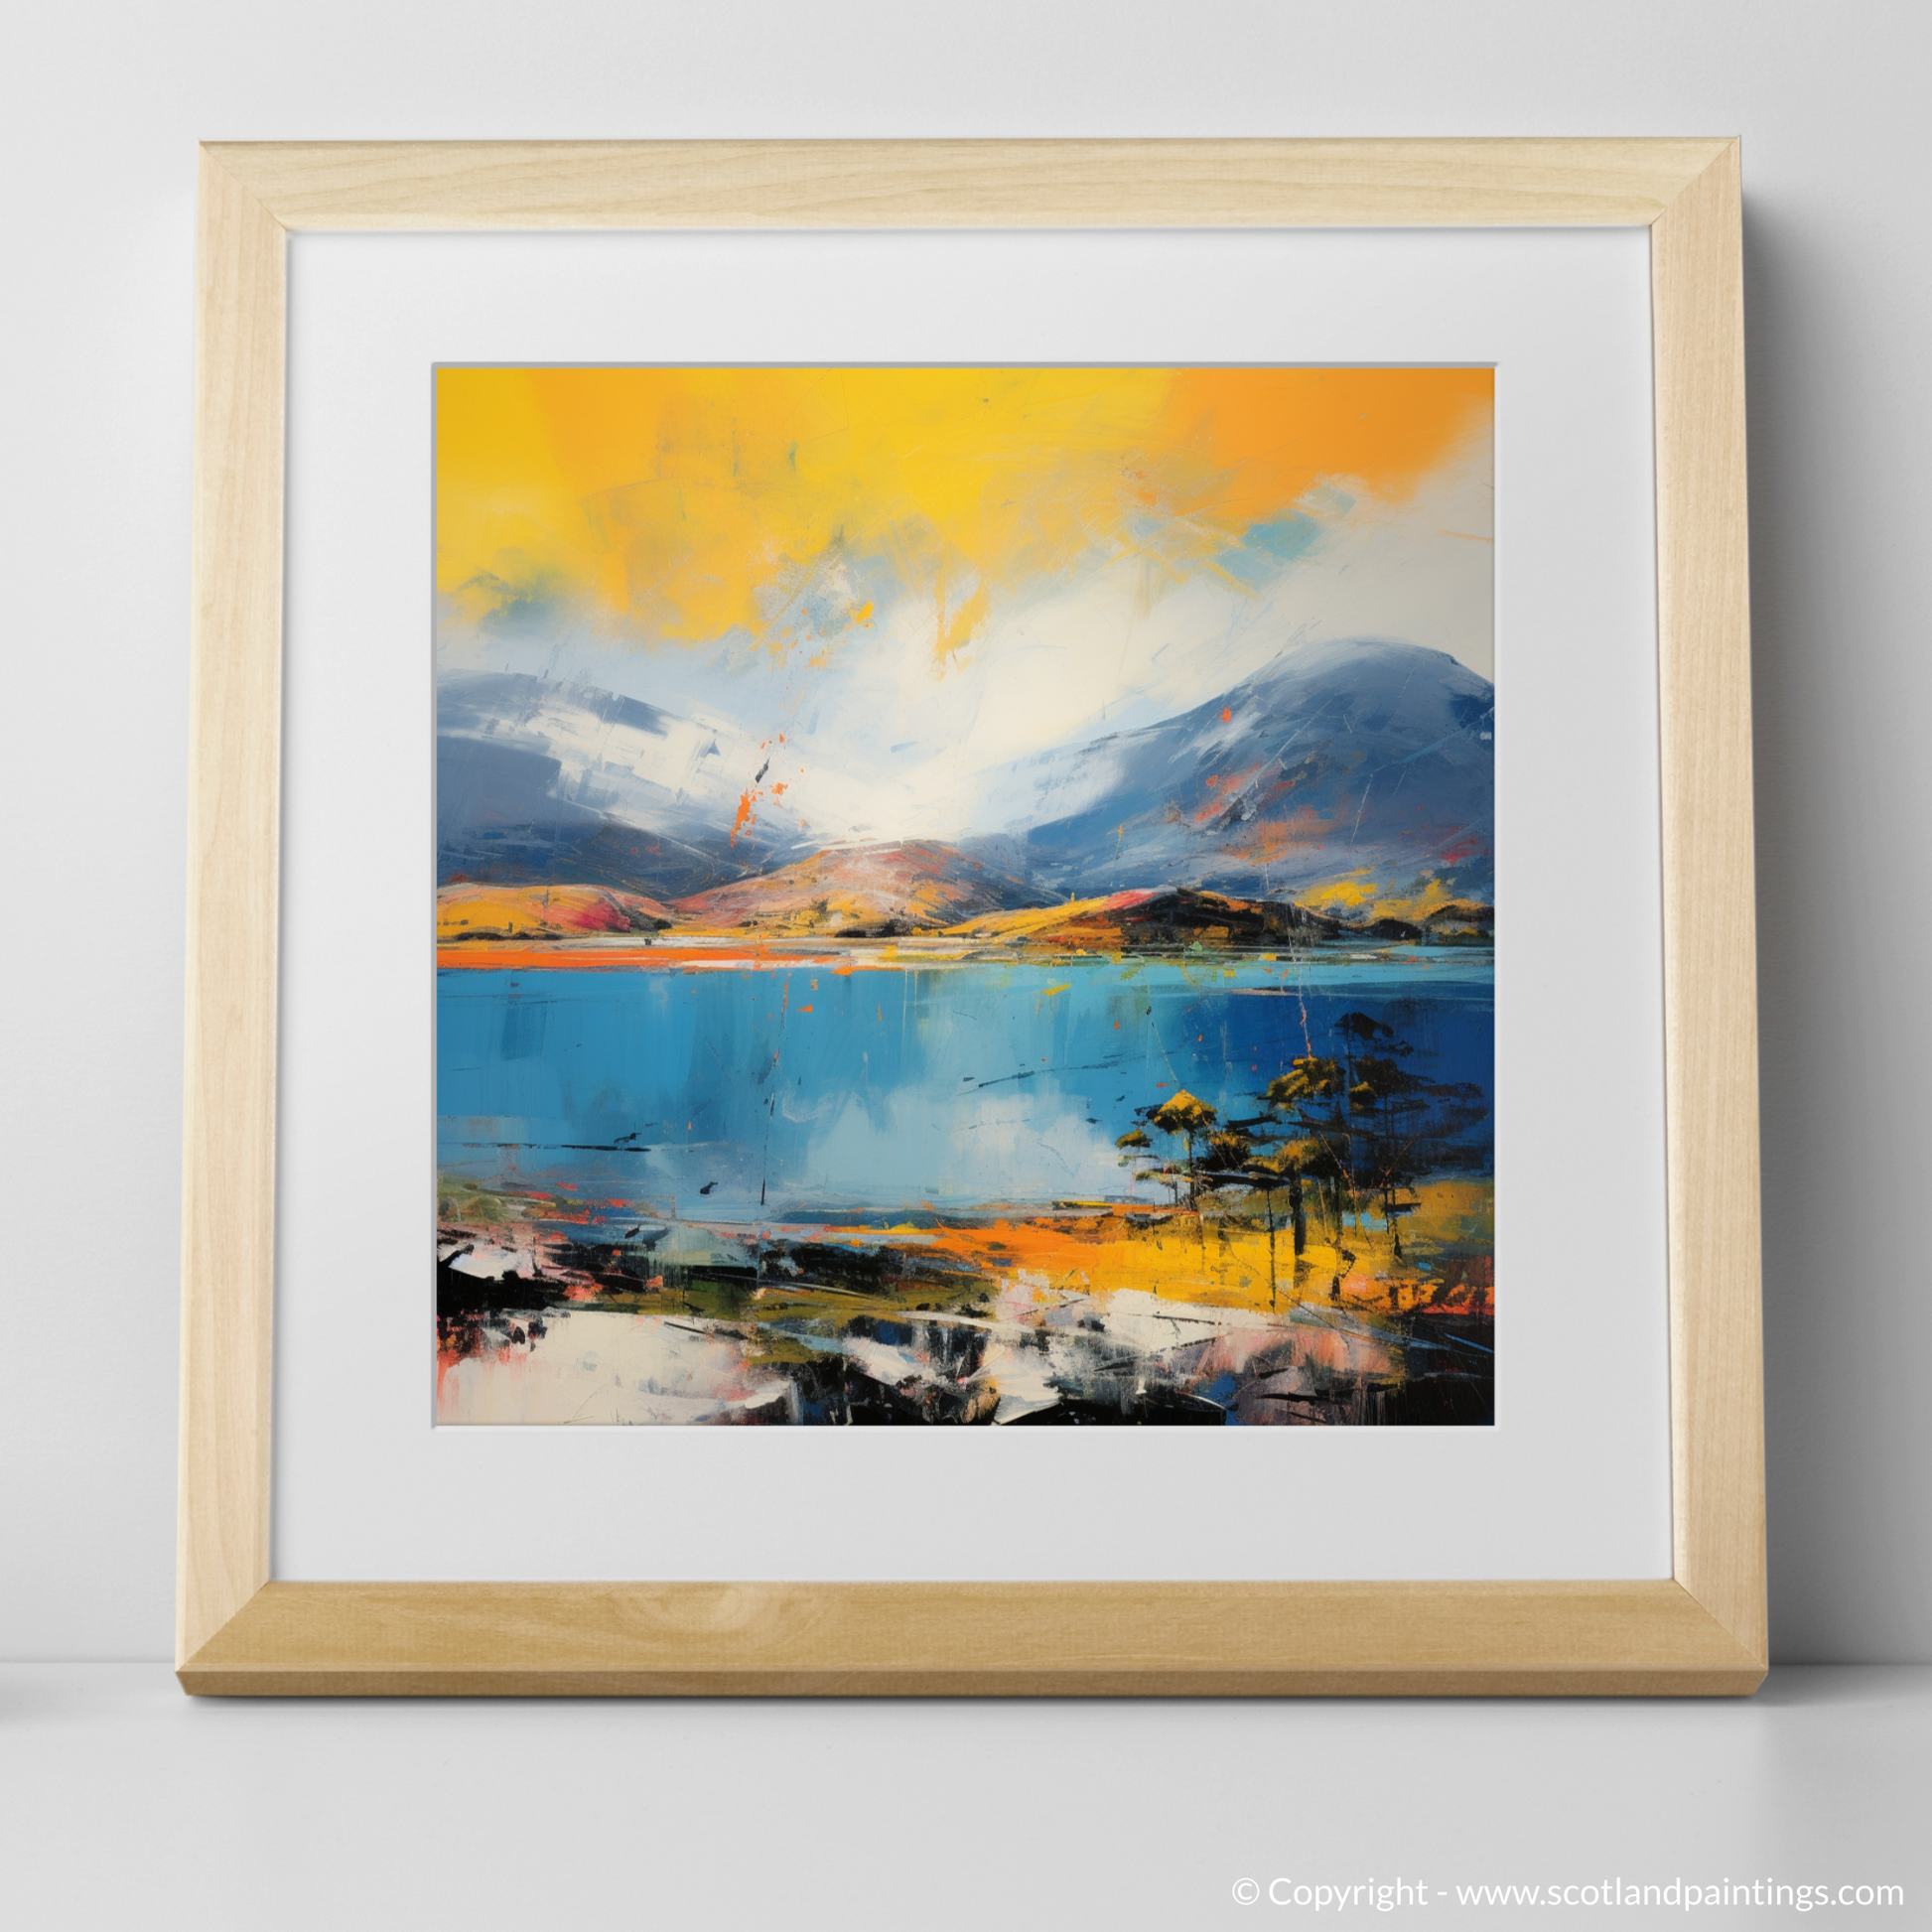 Art Print of Loch Maree, Wester Ross in summer with a natural frame